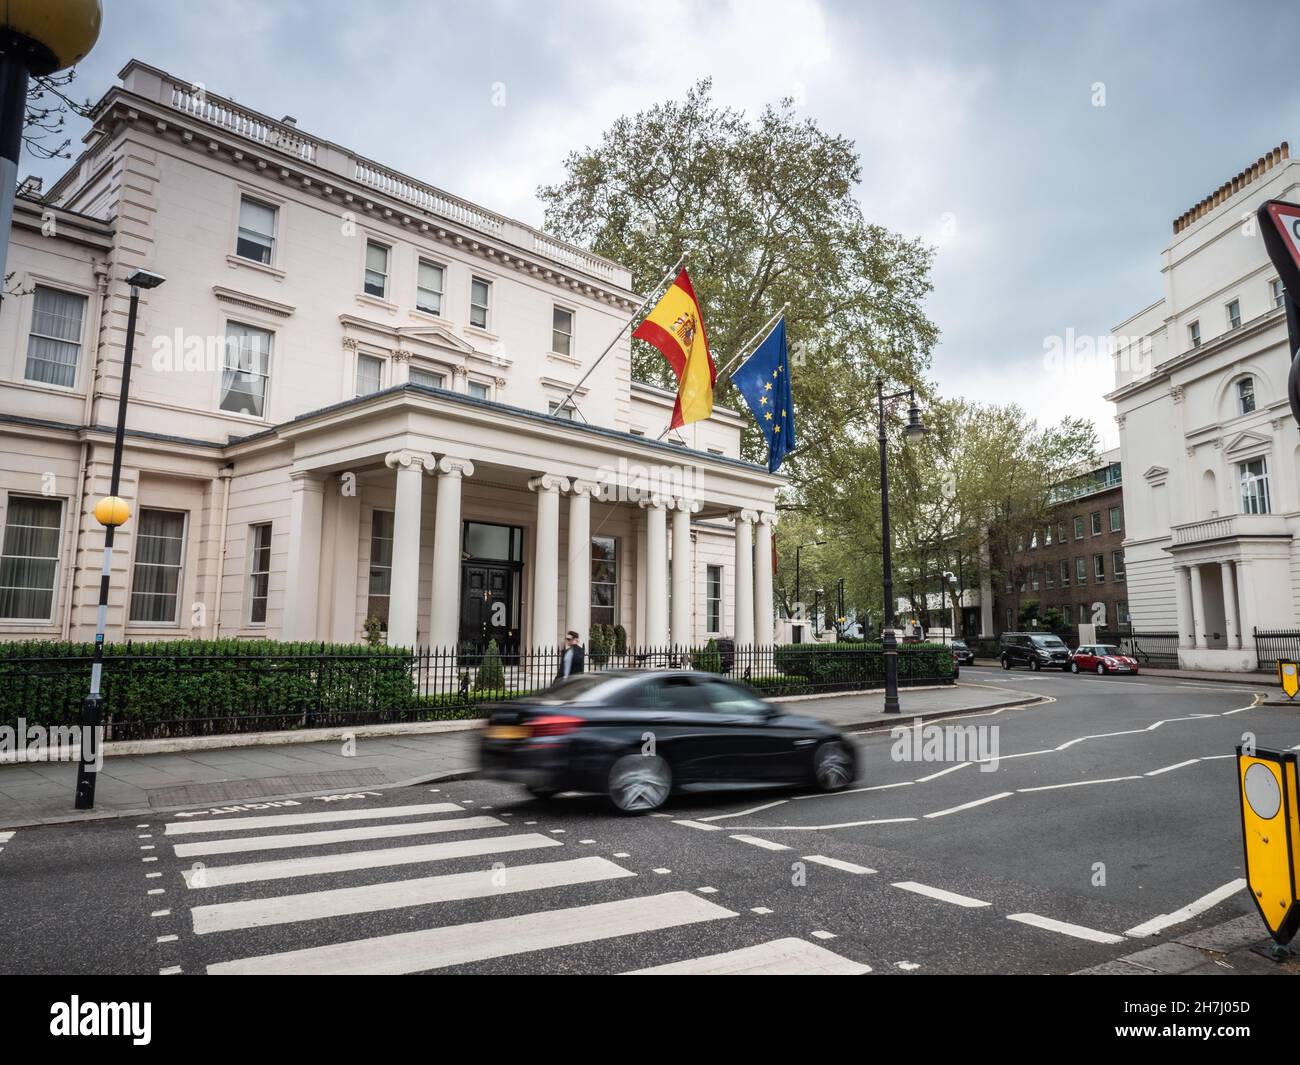 Embassy of Spain, London, UK. The National and EU flags flying over entrance to the Spanish Embassy in London's Belgravia district. Stock Photo